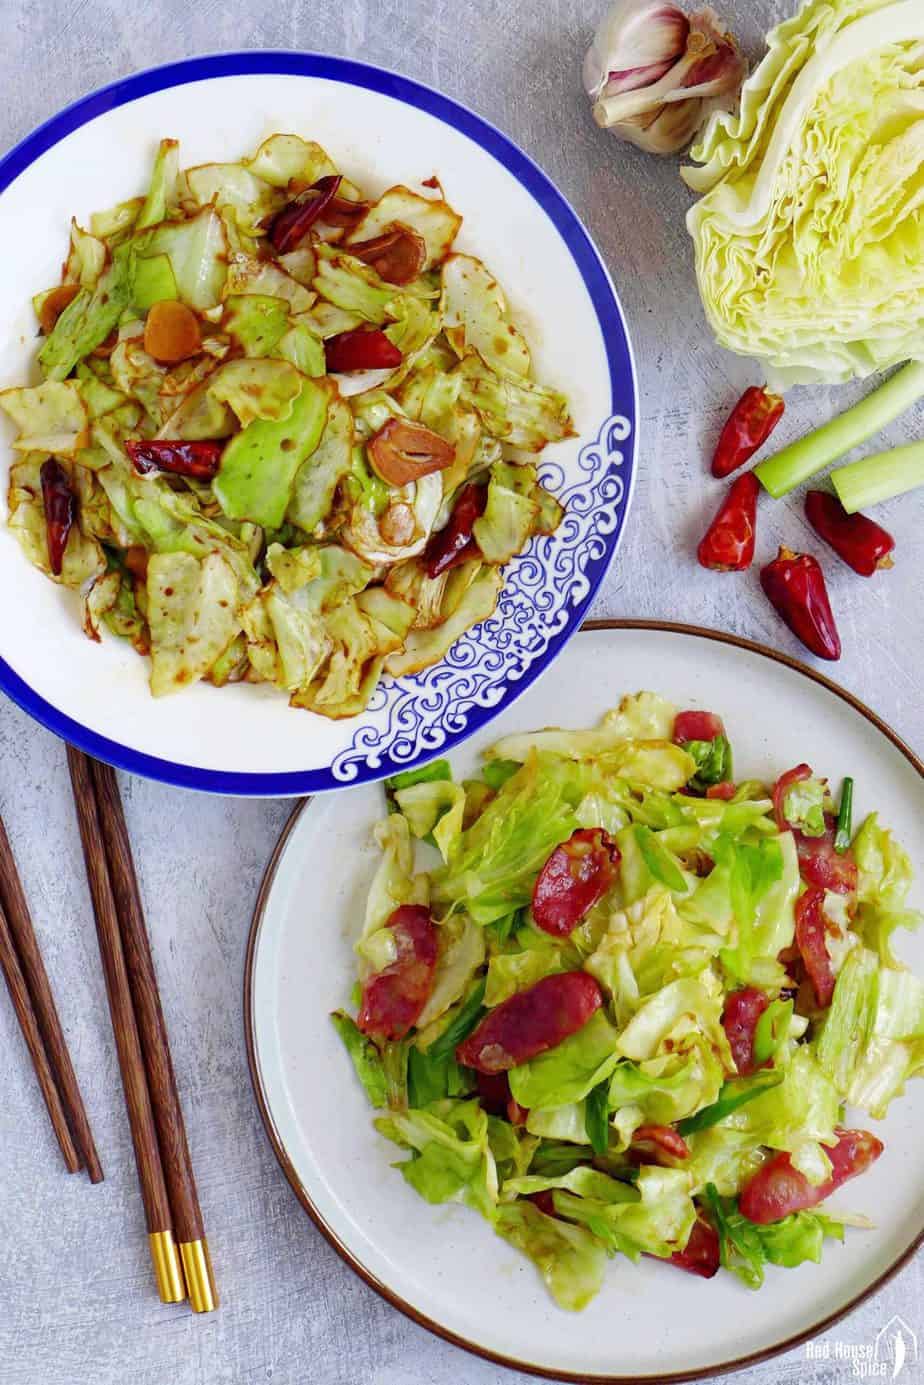 Two plates of Chinese cabbage stir-fry